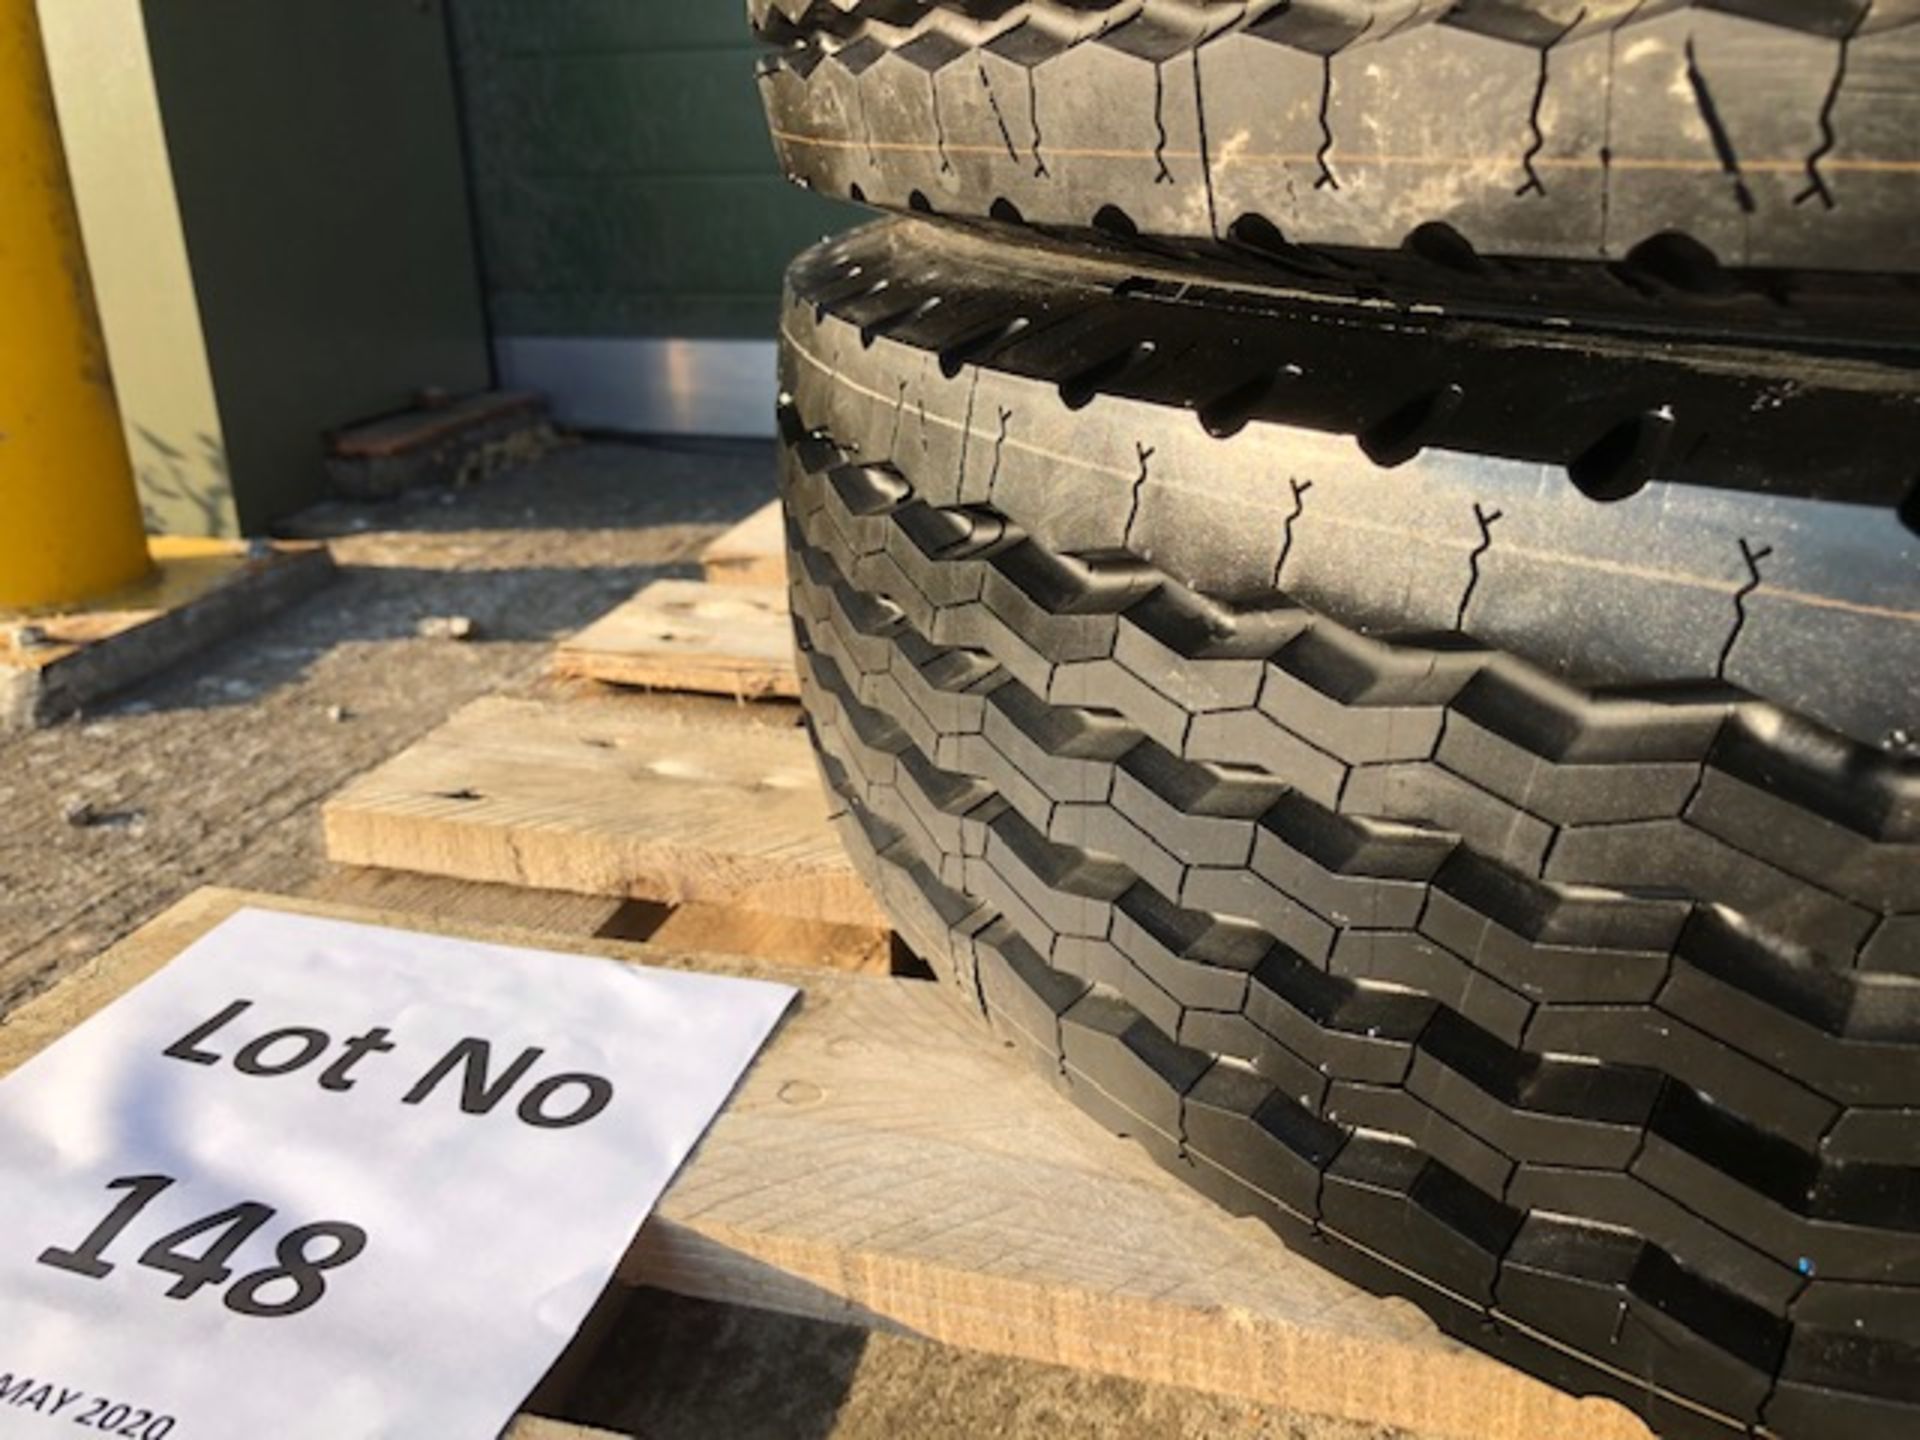 Qty 2 x 7.5R16 Michelin XZAI Tyres 14 Ply rating unused with bobbles - Image 3 of 7